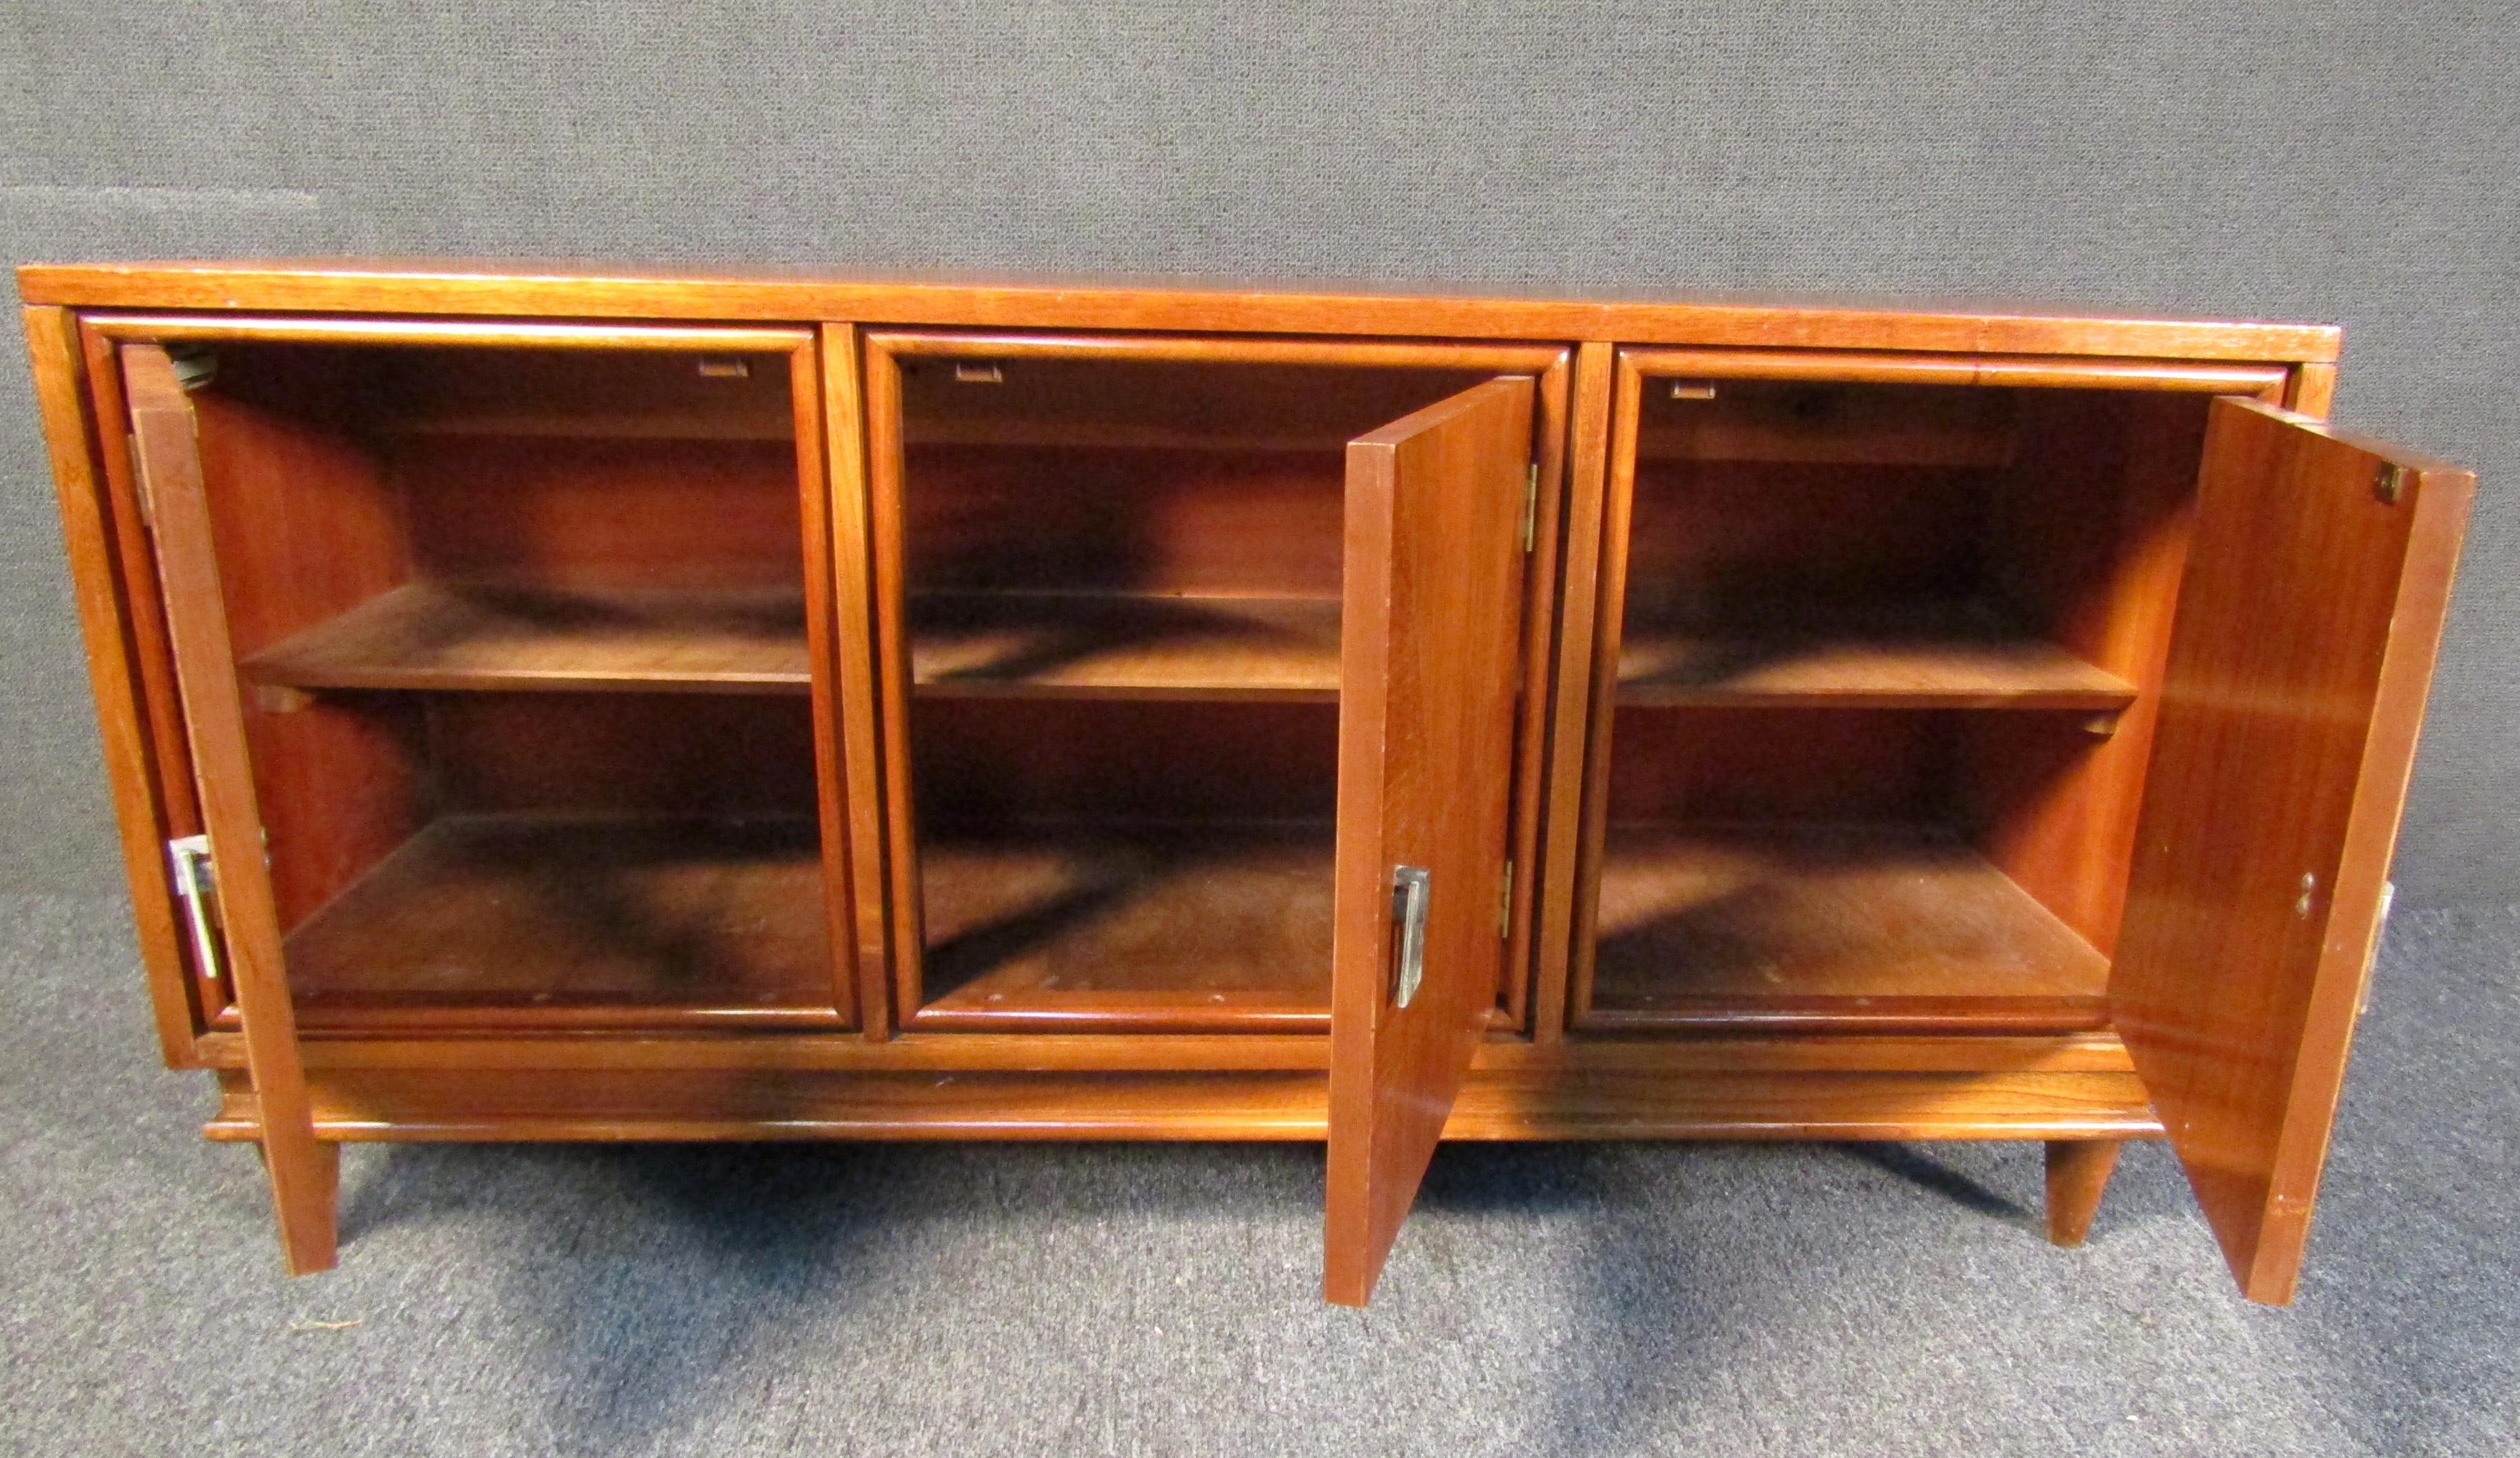 This unique Mid-Century Modern credenza features beautiful multi-Directional veneer on cabinet doors, as well as unique mid-century pulls. The spacious interior provides ample storage. Perfect for any home or office.

Please confirm item location